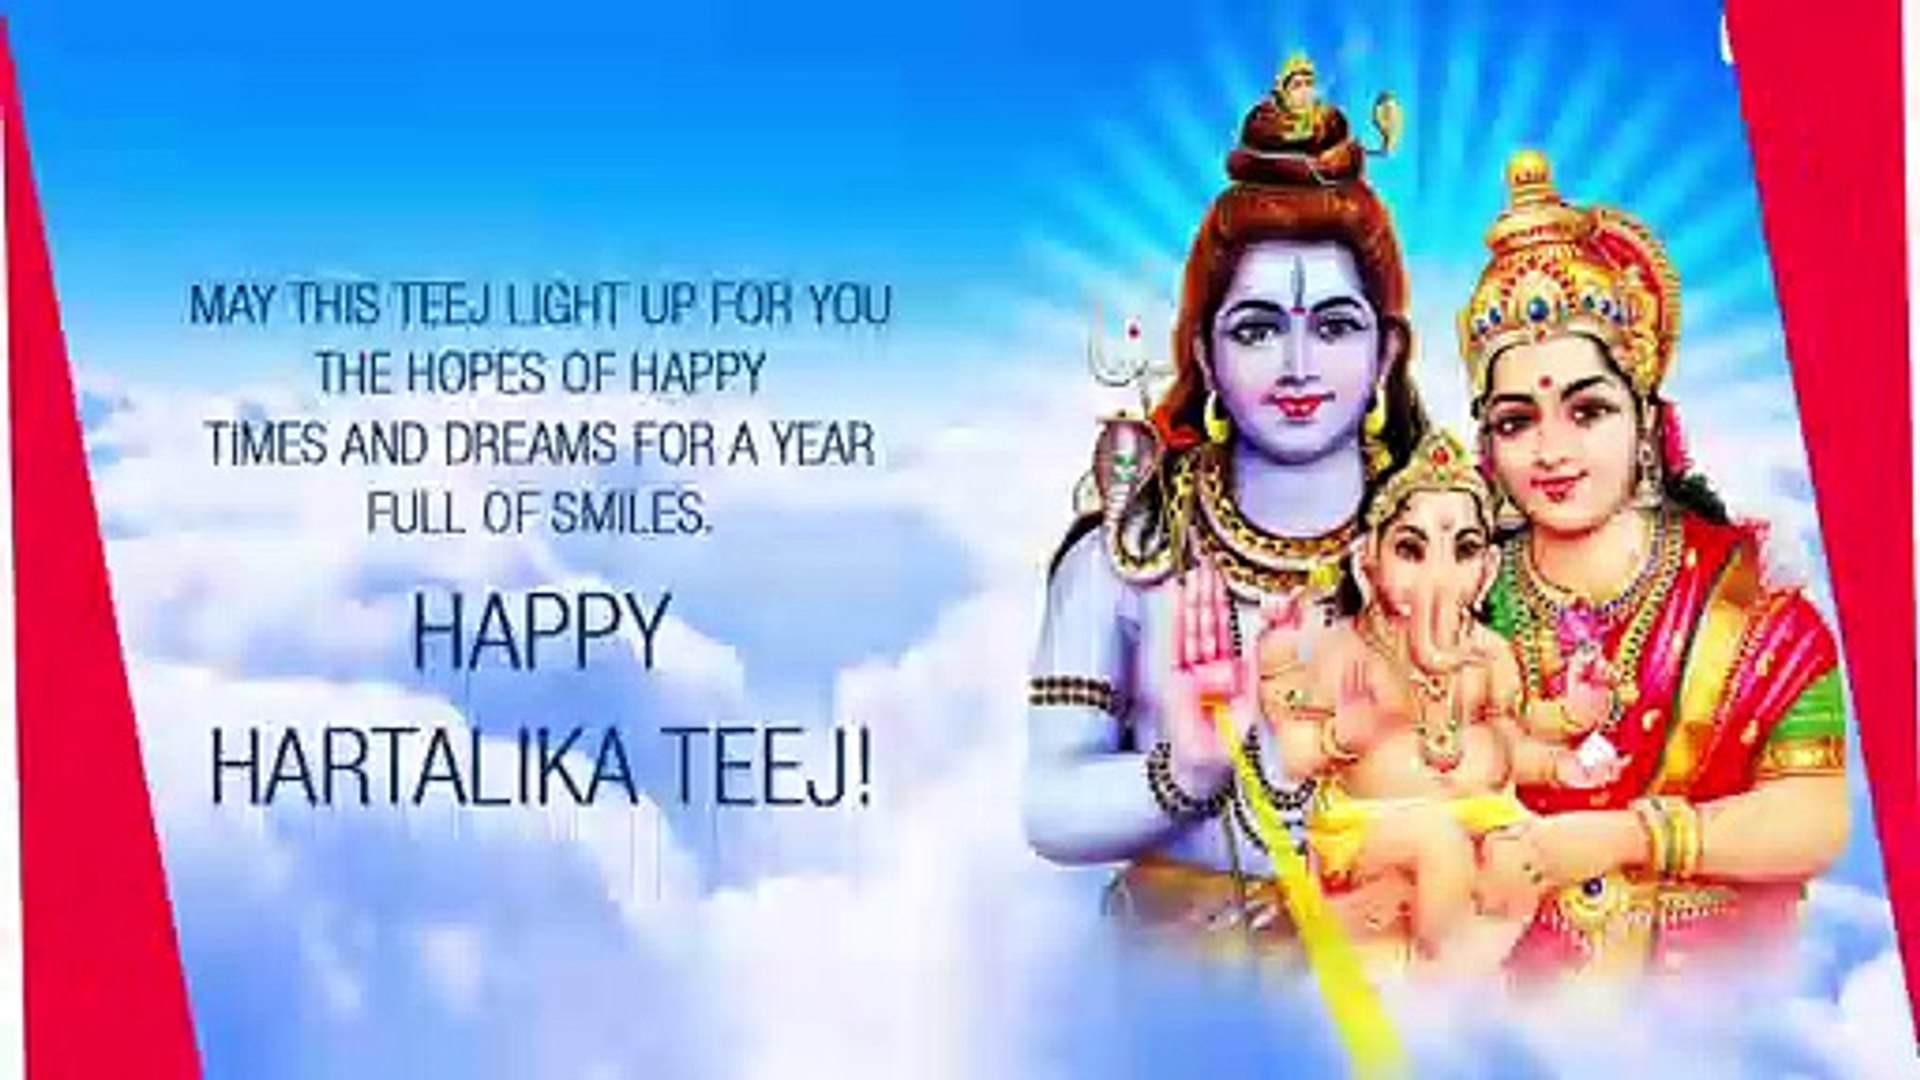 Hartalika Teej 2022 Wishes, Goddess Parvati Images, WhatsApp Messages &  Quotes for the Holy Day - video Dailymotion